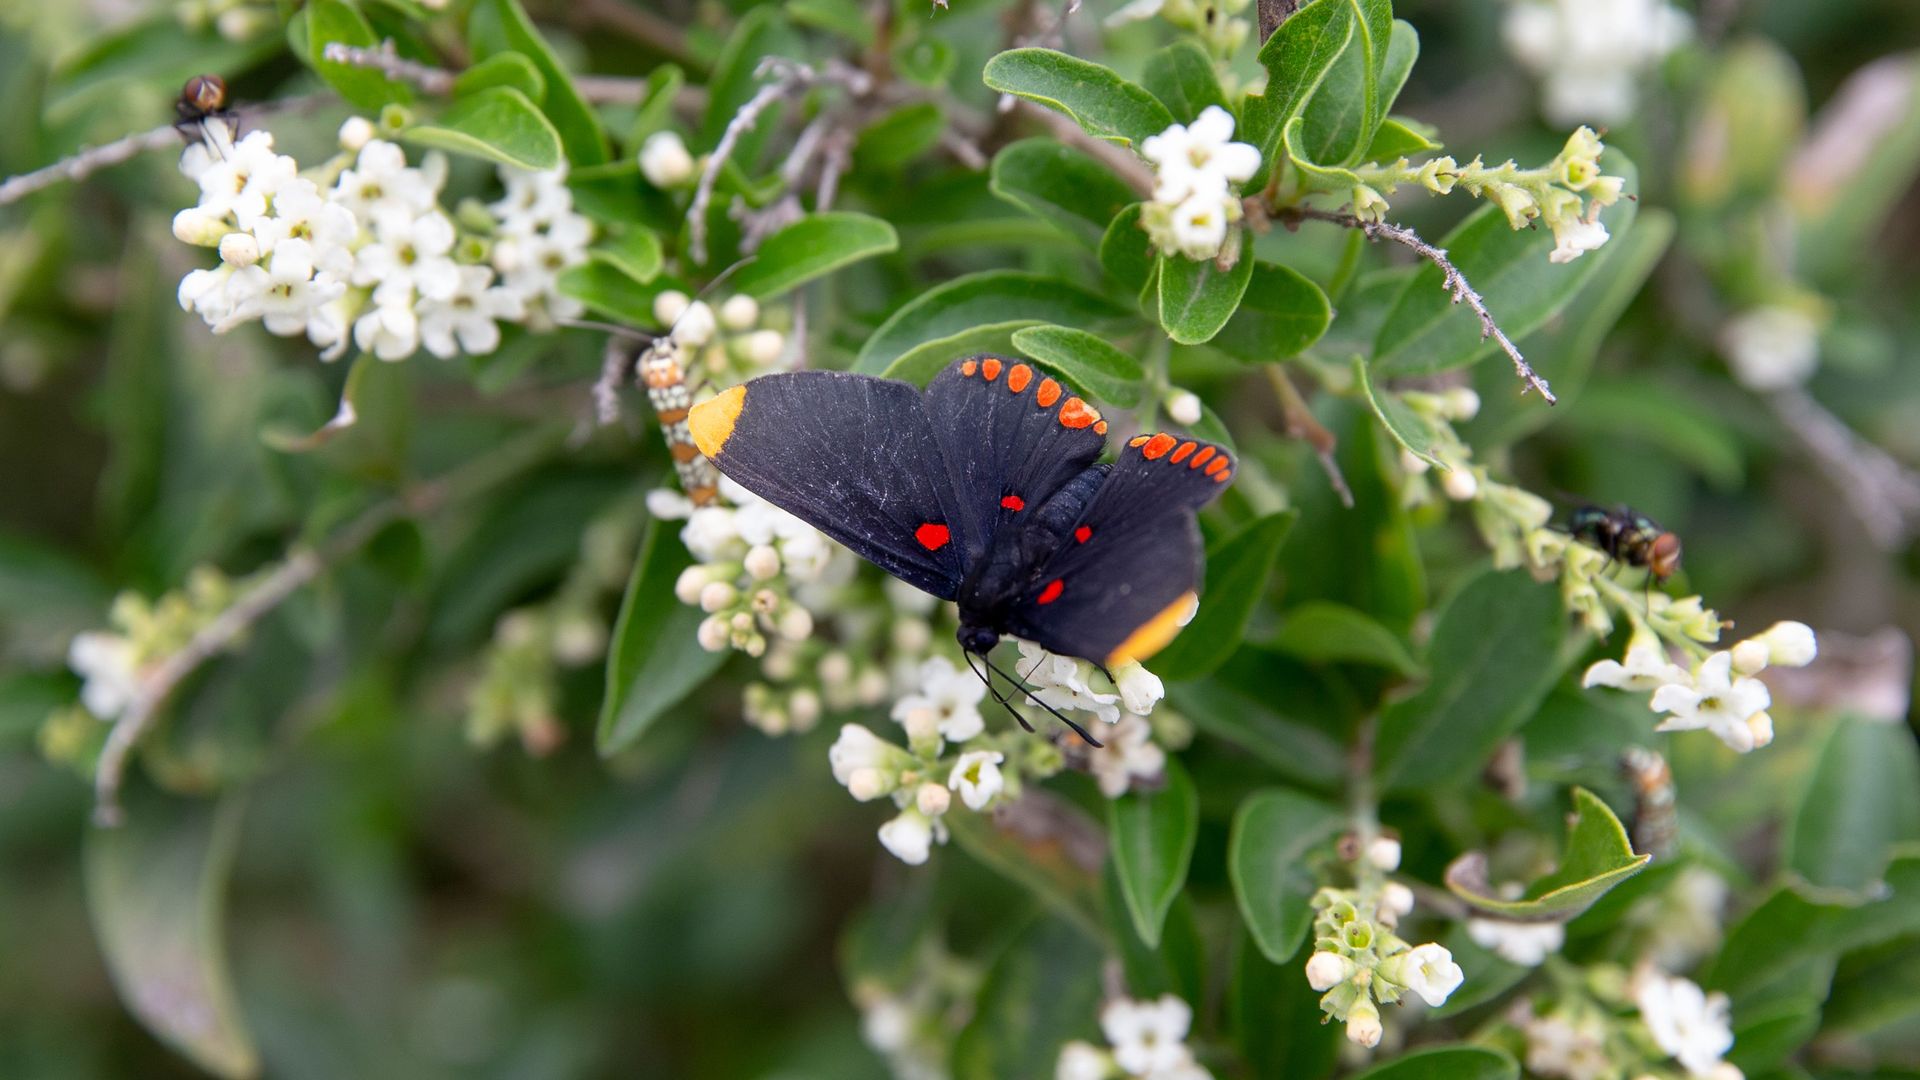 Photo of a red-bordered Pixie butterfly landed on a plant with green leaves and white flowers